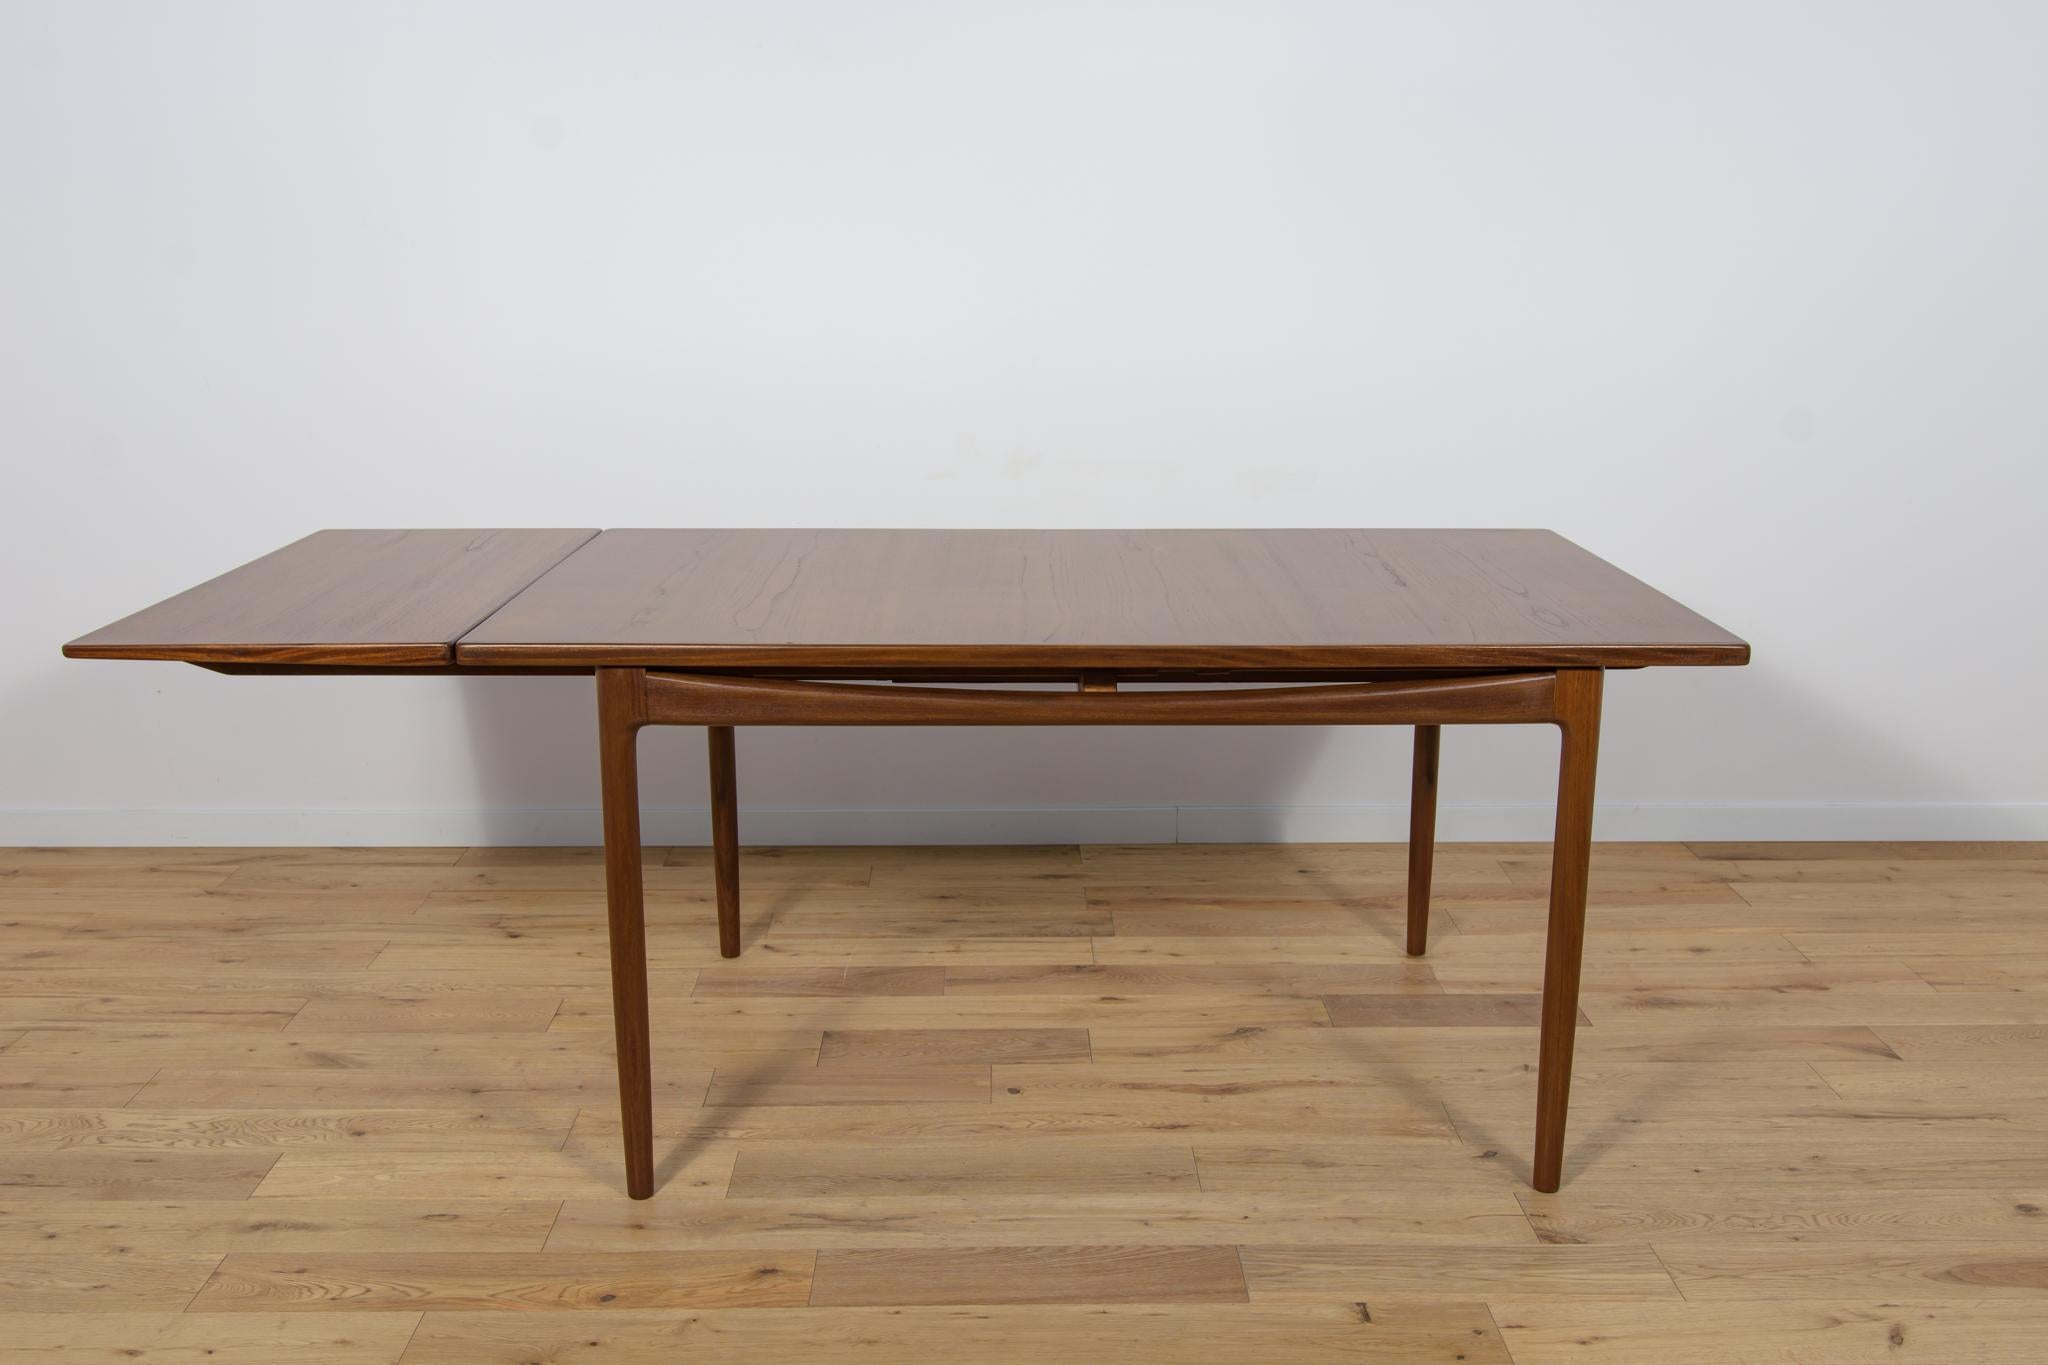 British Mid-Century Dining Table by Ib Kofod Larsen for G-Plan, 1960s For Sale